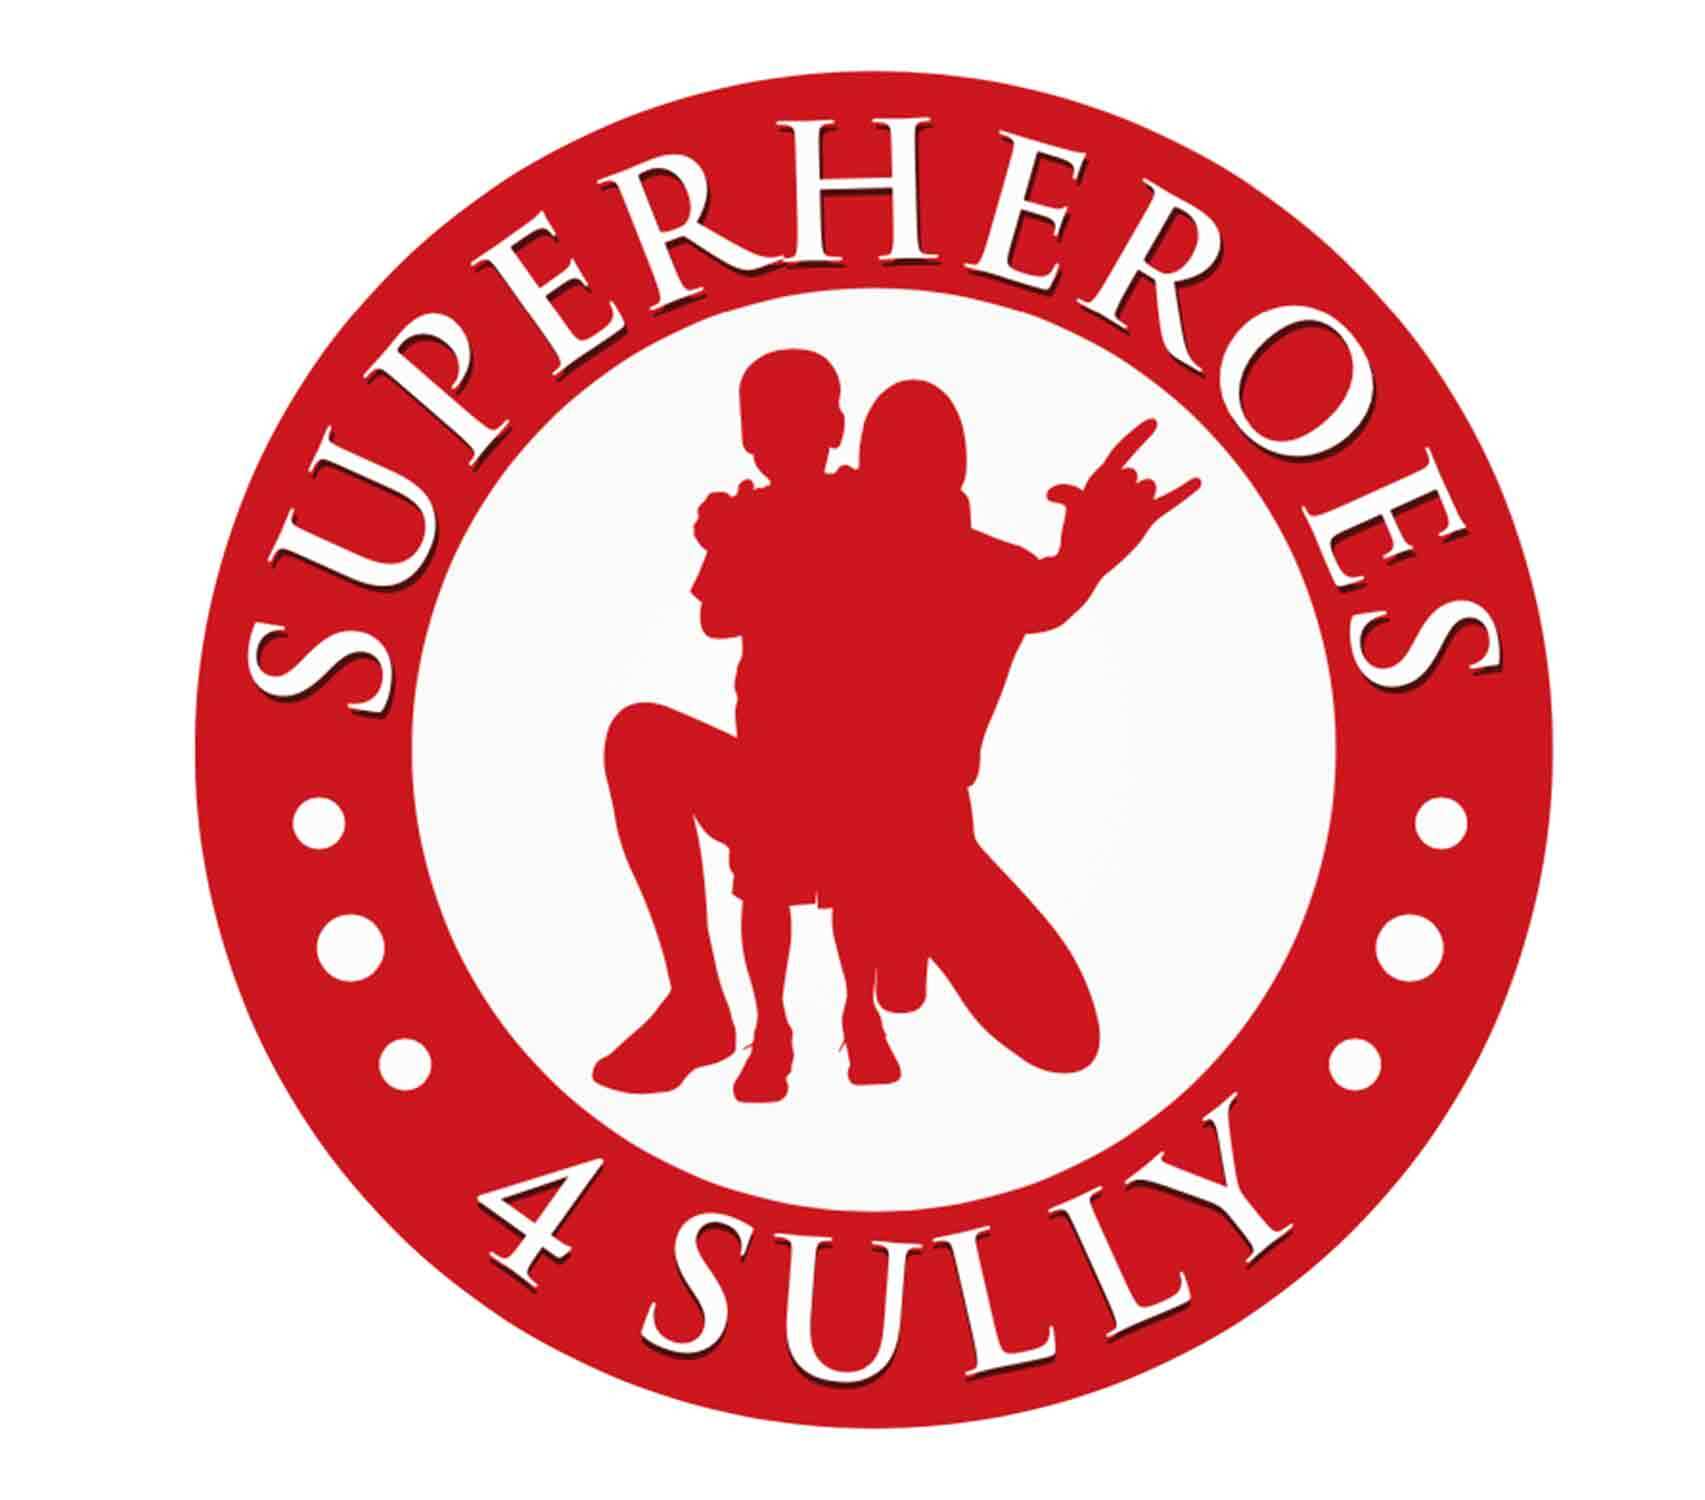 Superheroes 4 Sully